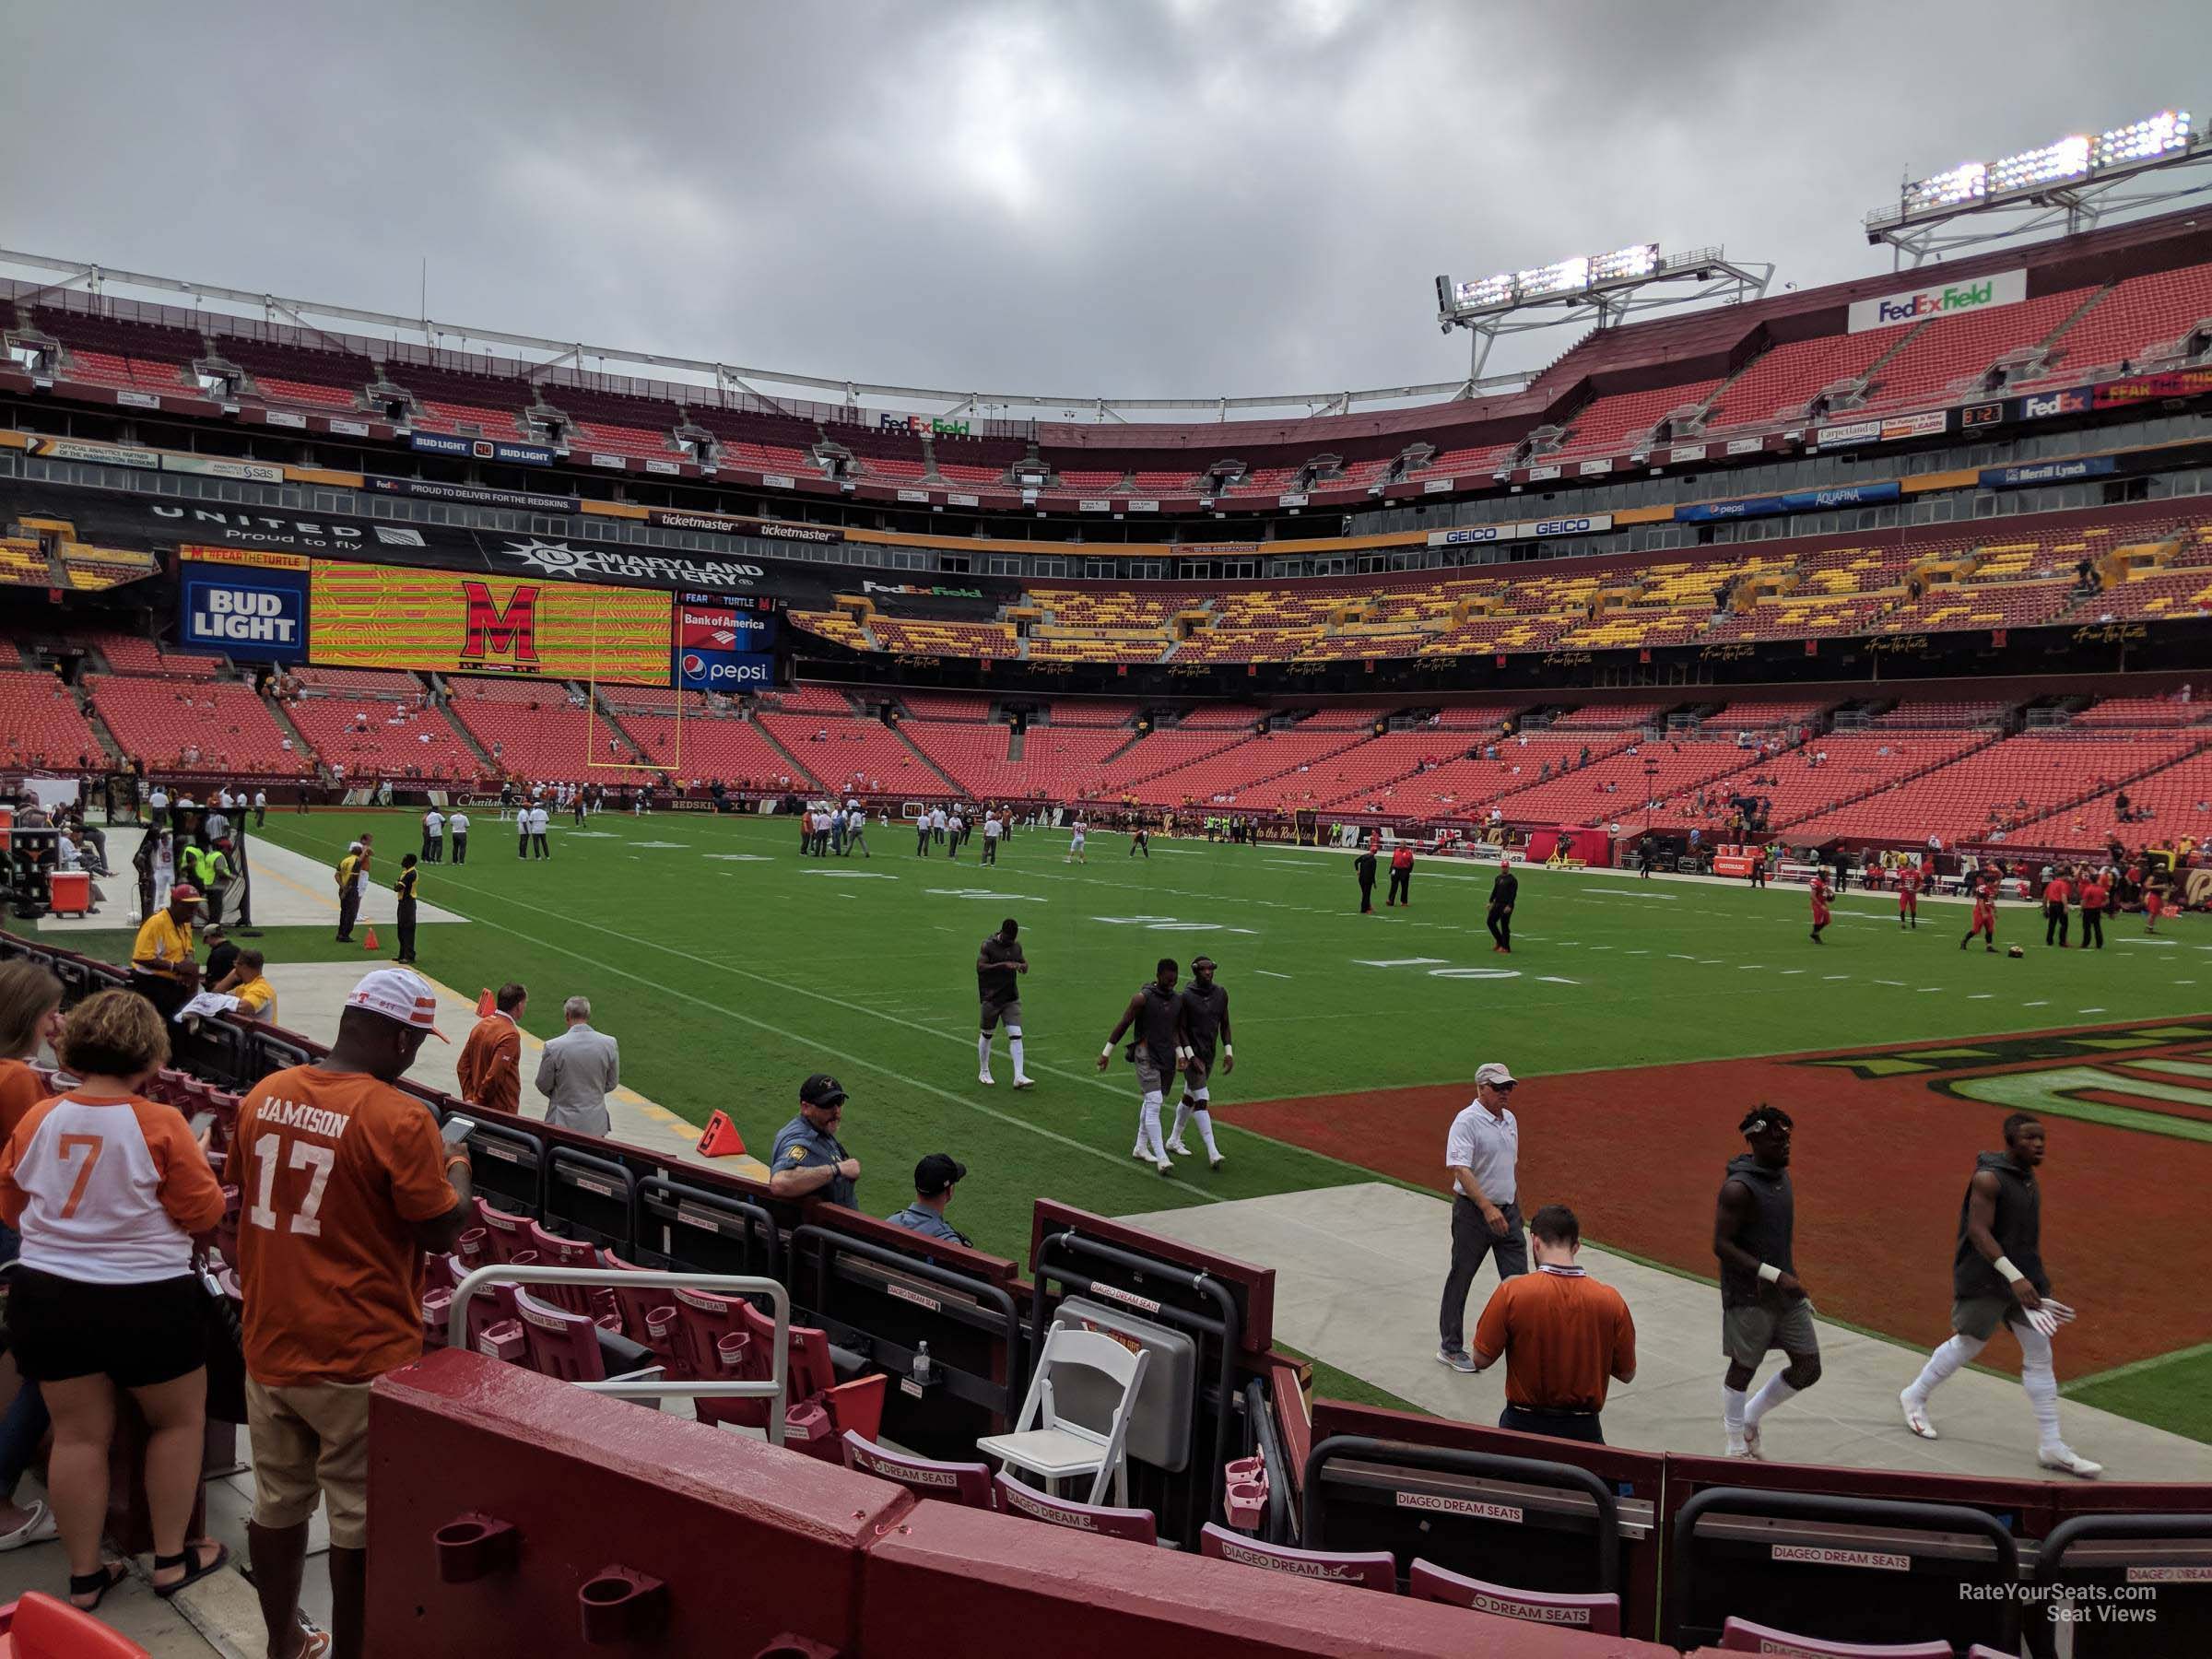 section 114, row 4 seat view  - fedexfield